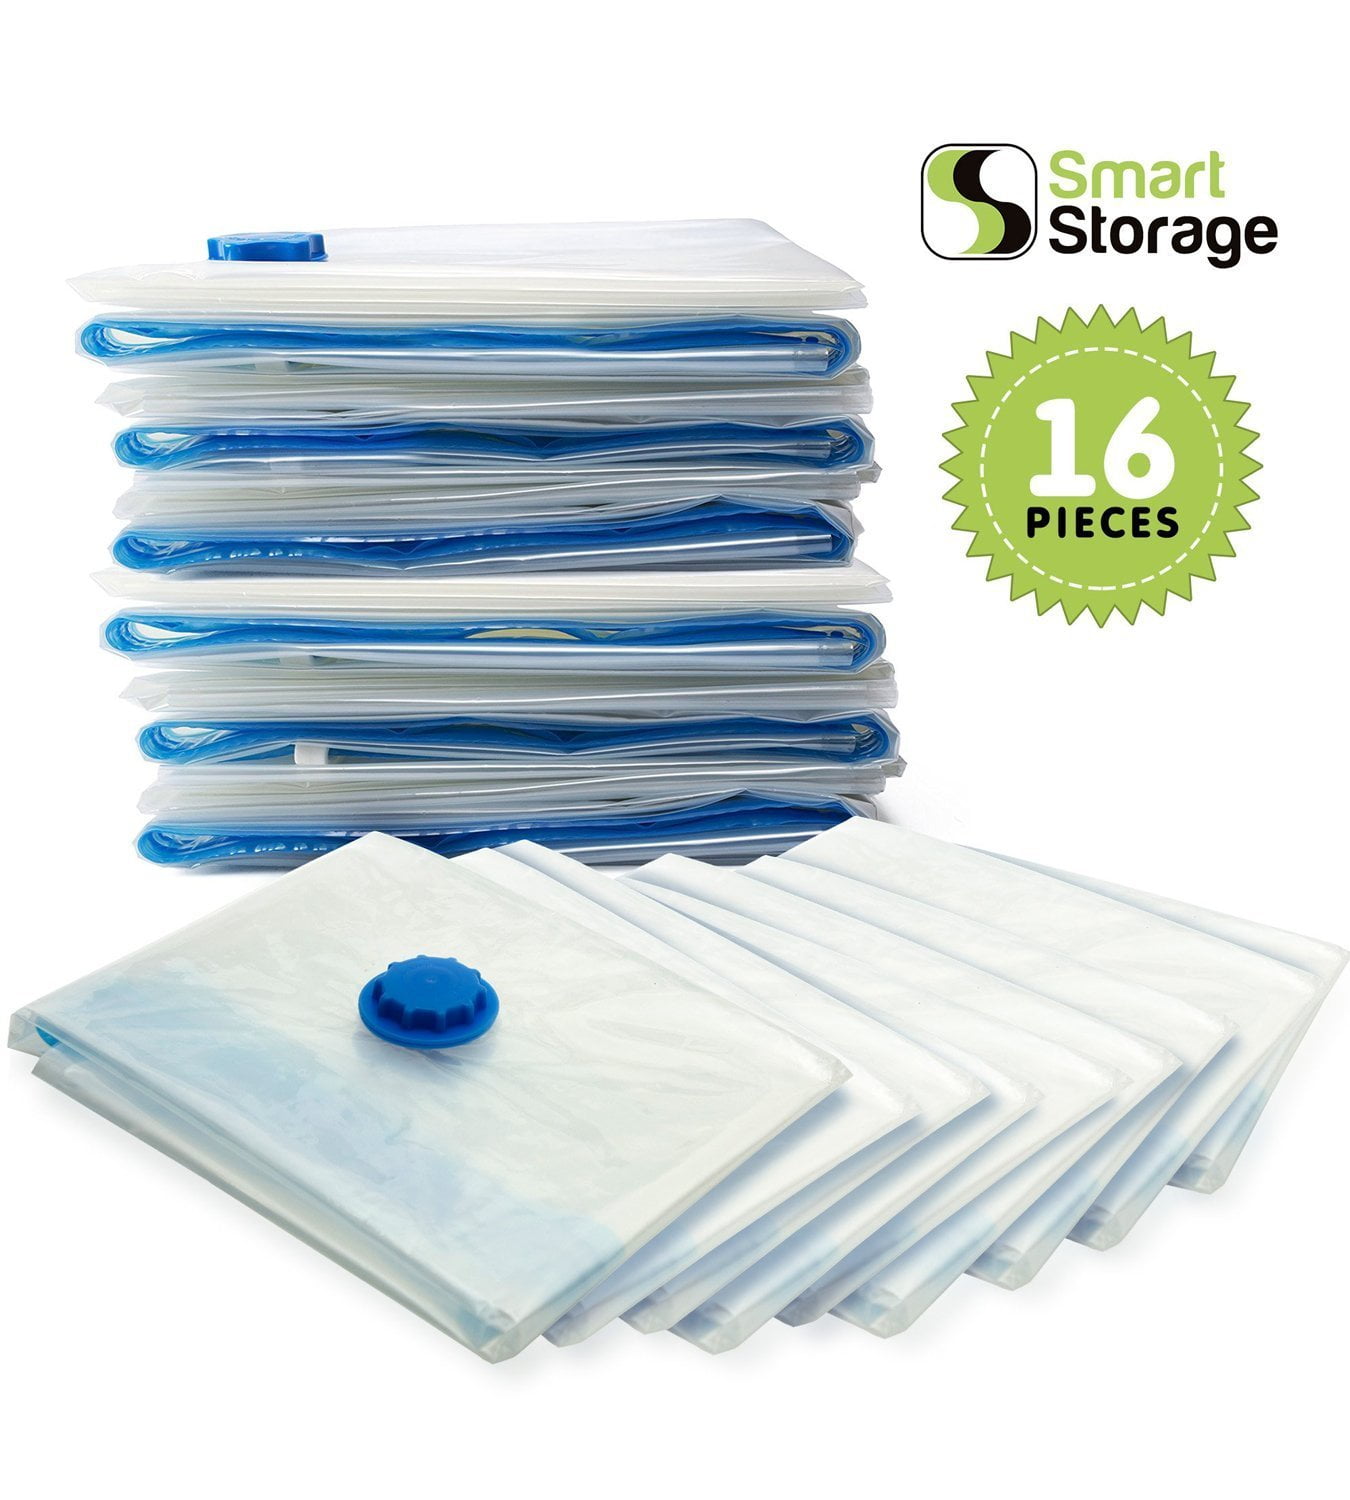 6 Pack：Small Size Vacuum Storage Bags 24x16,85% More Storage